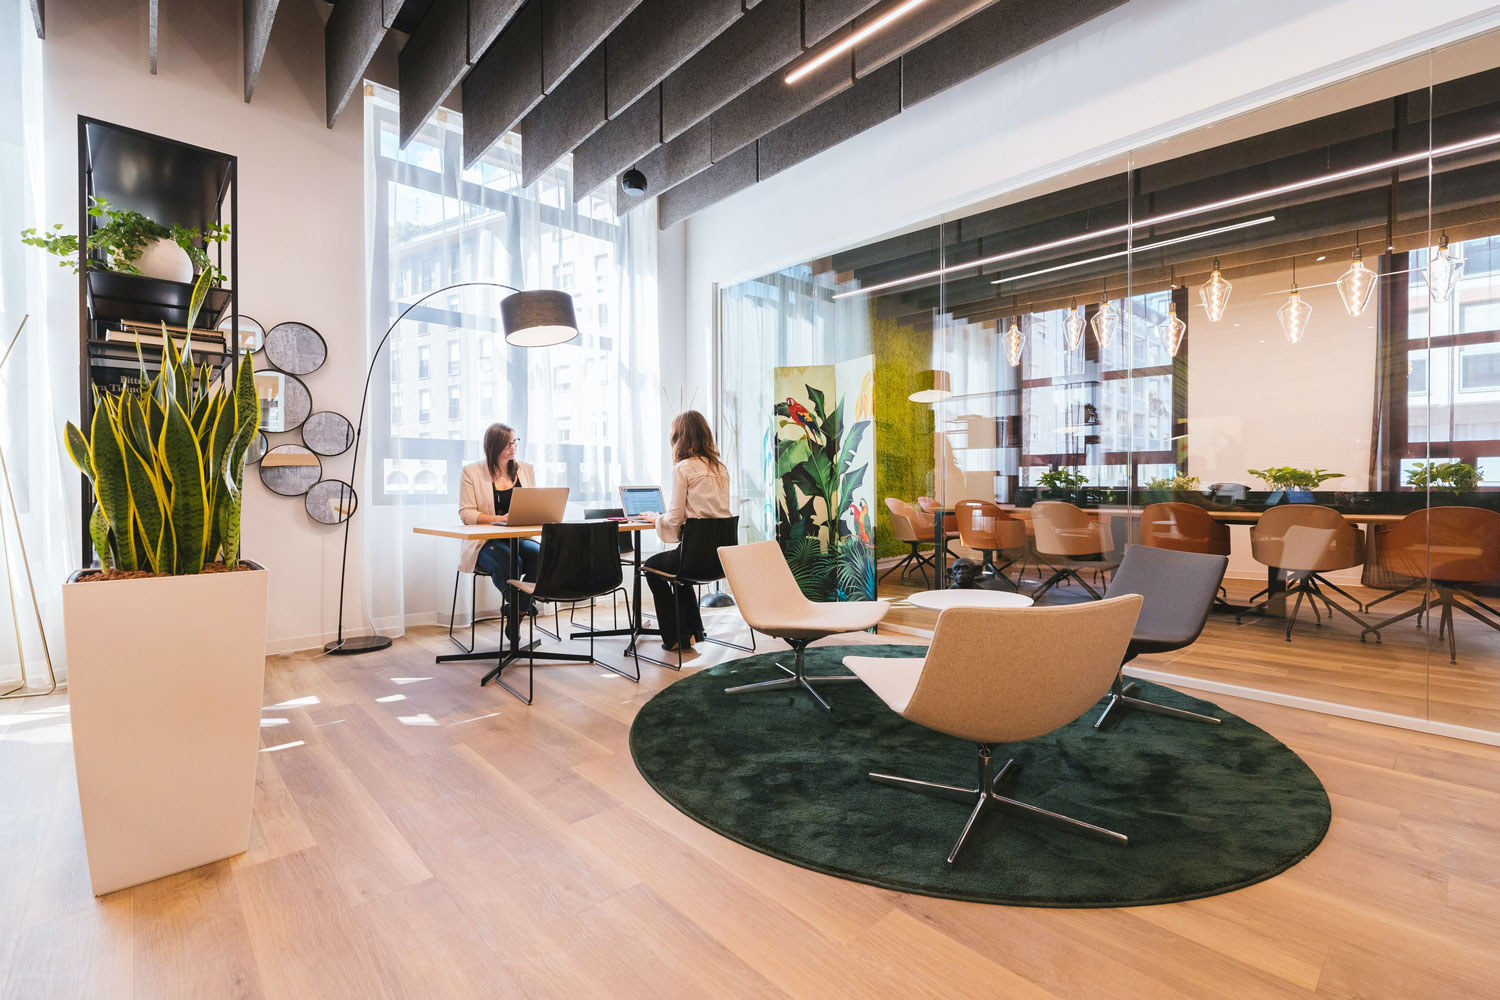 How to find the right office space